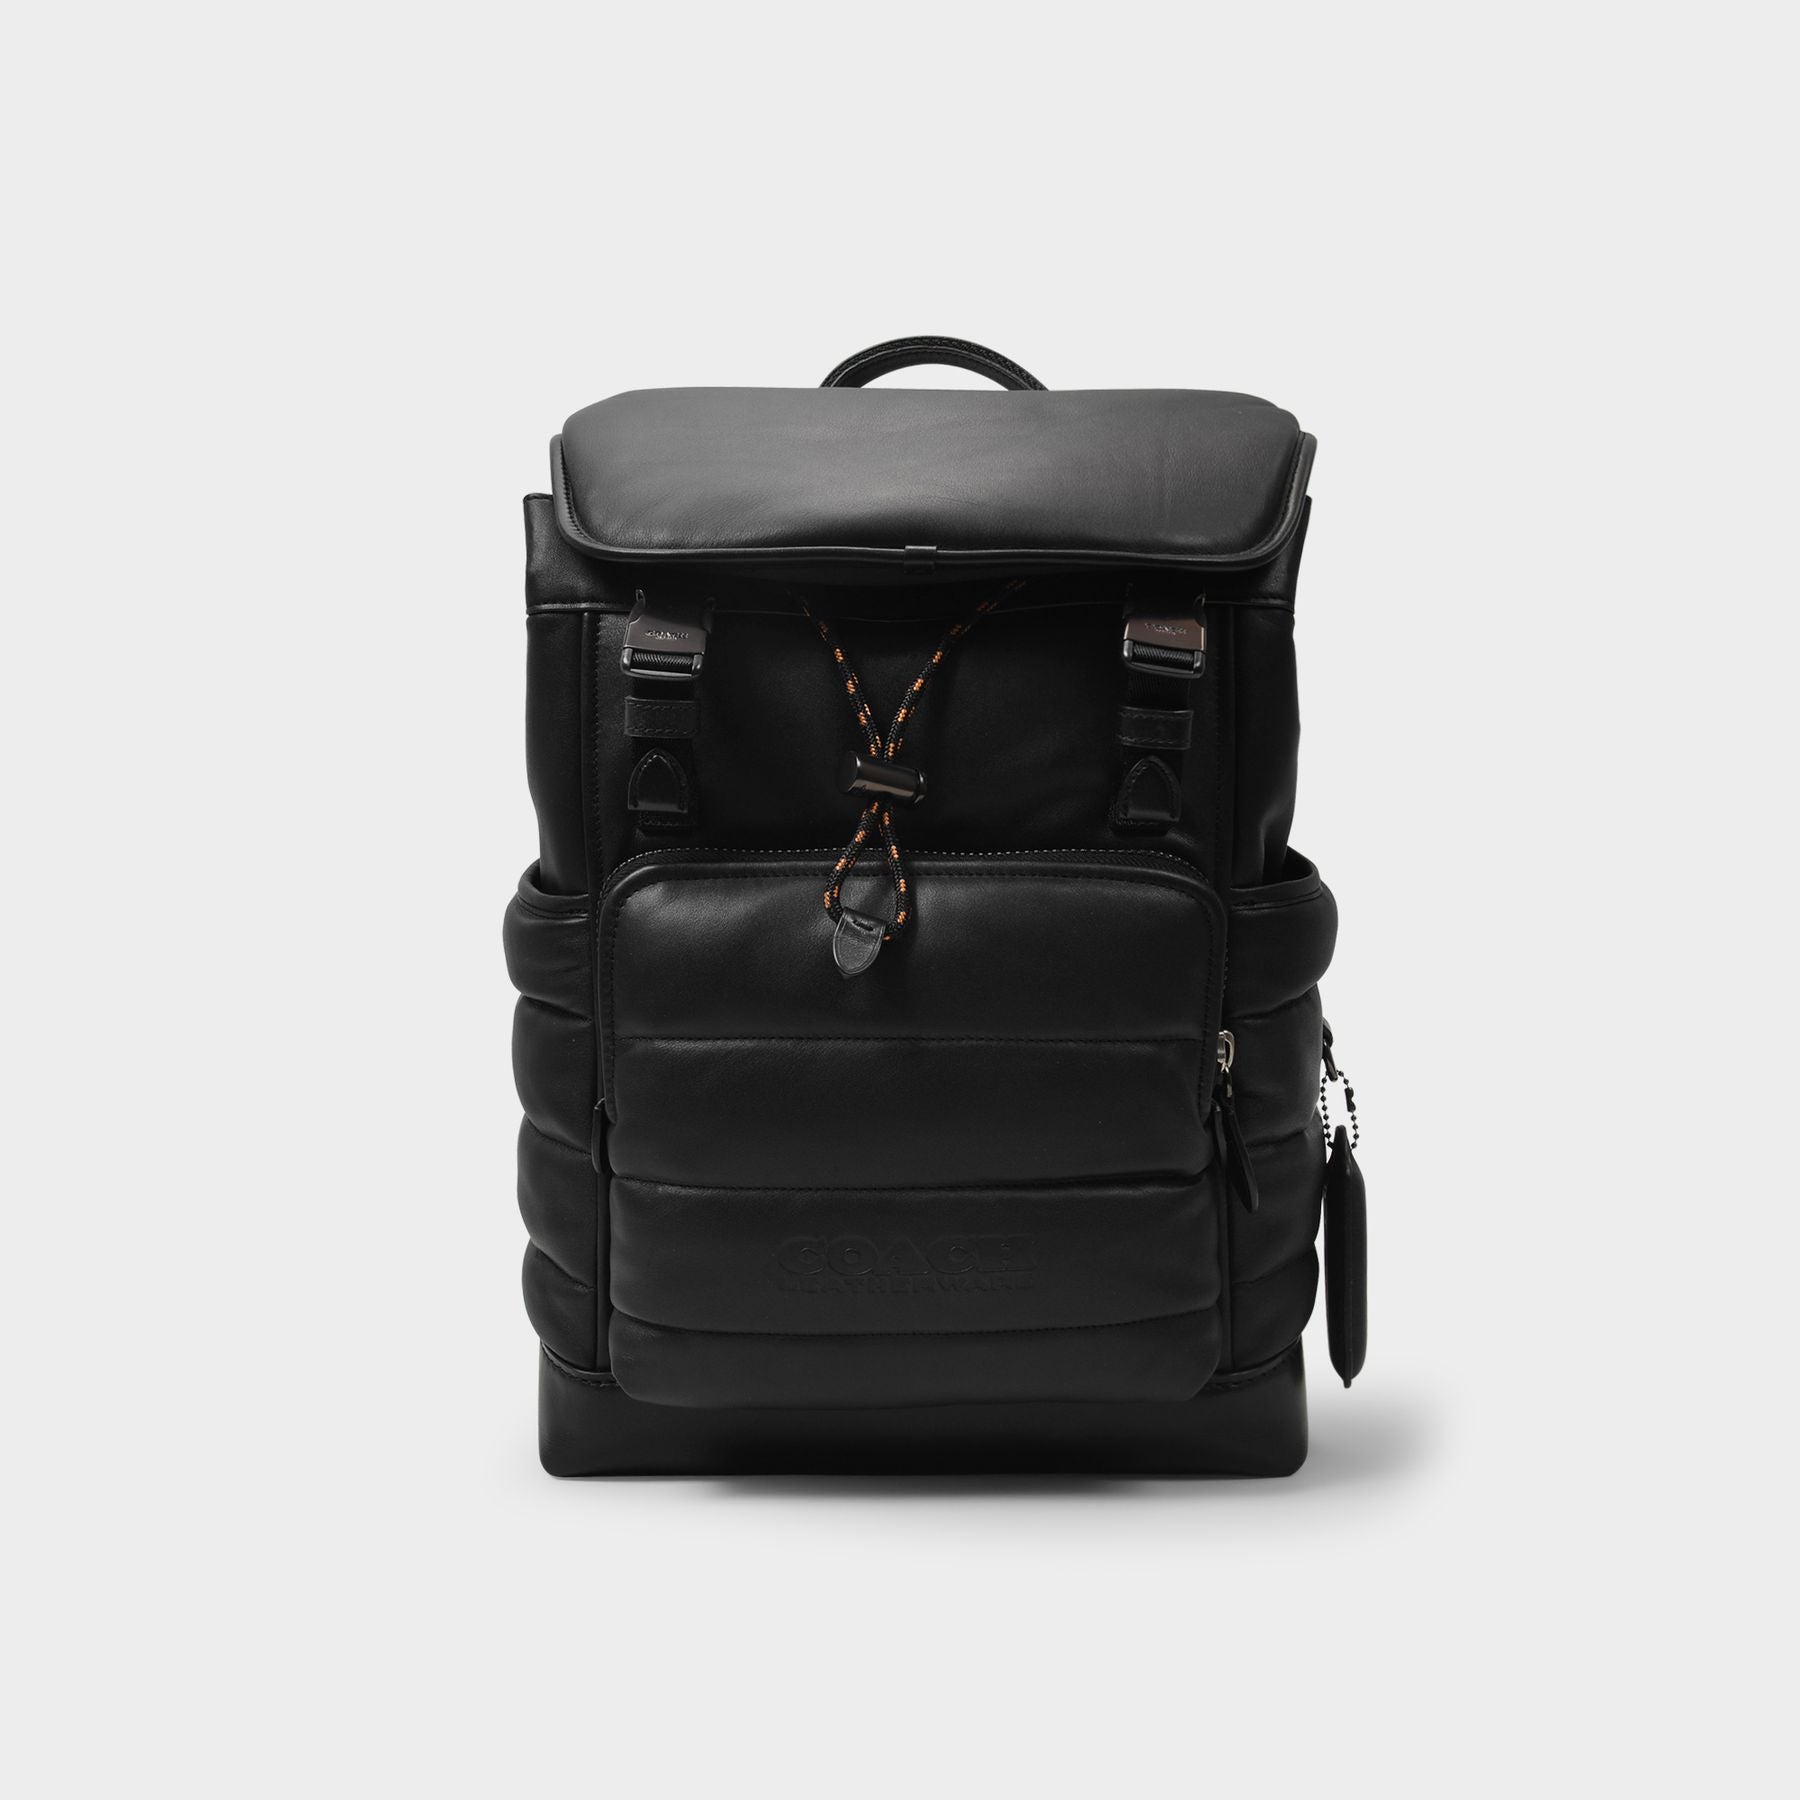 League Backpack in Black Leather